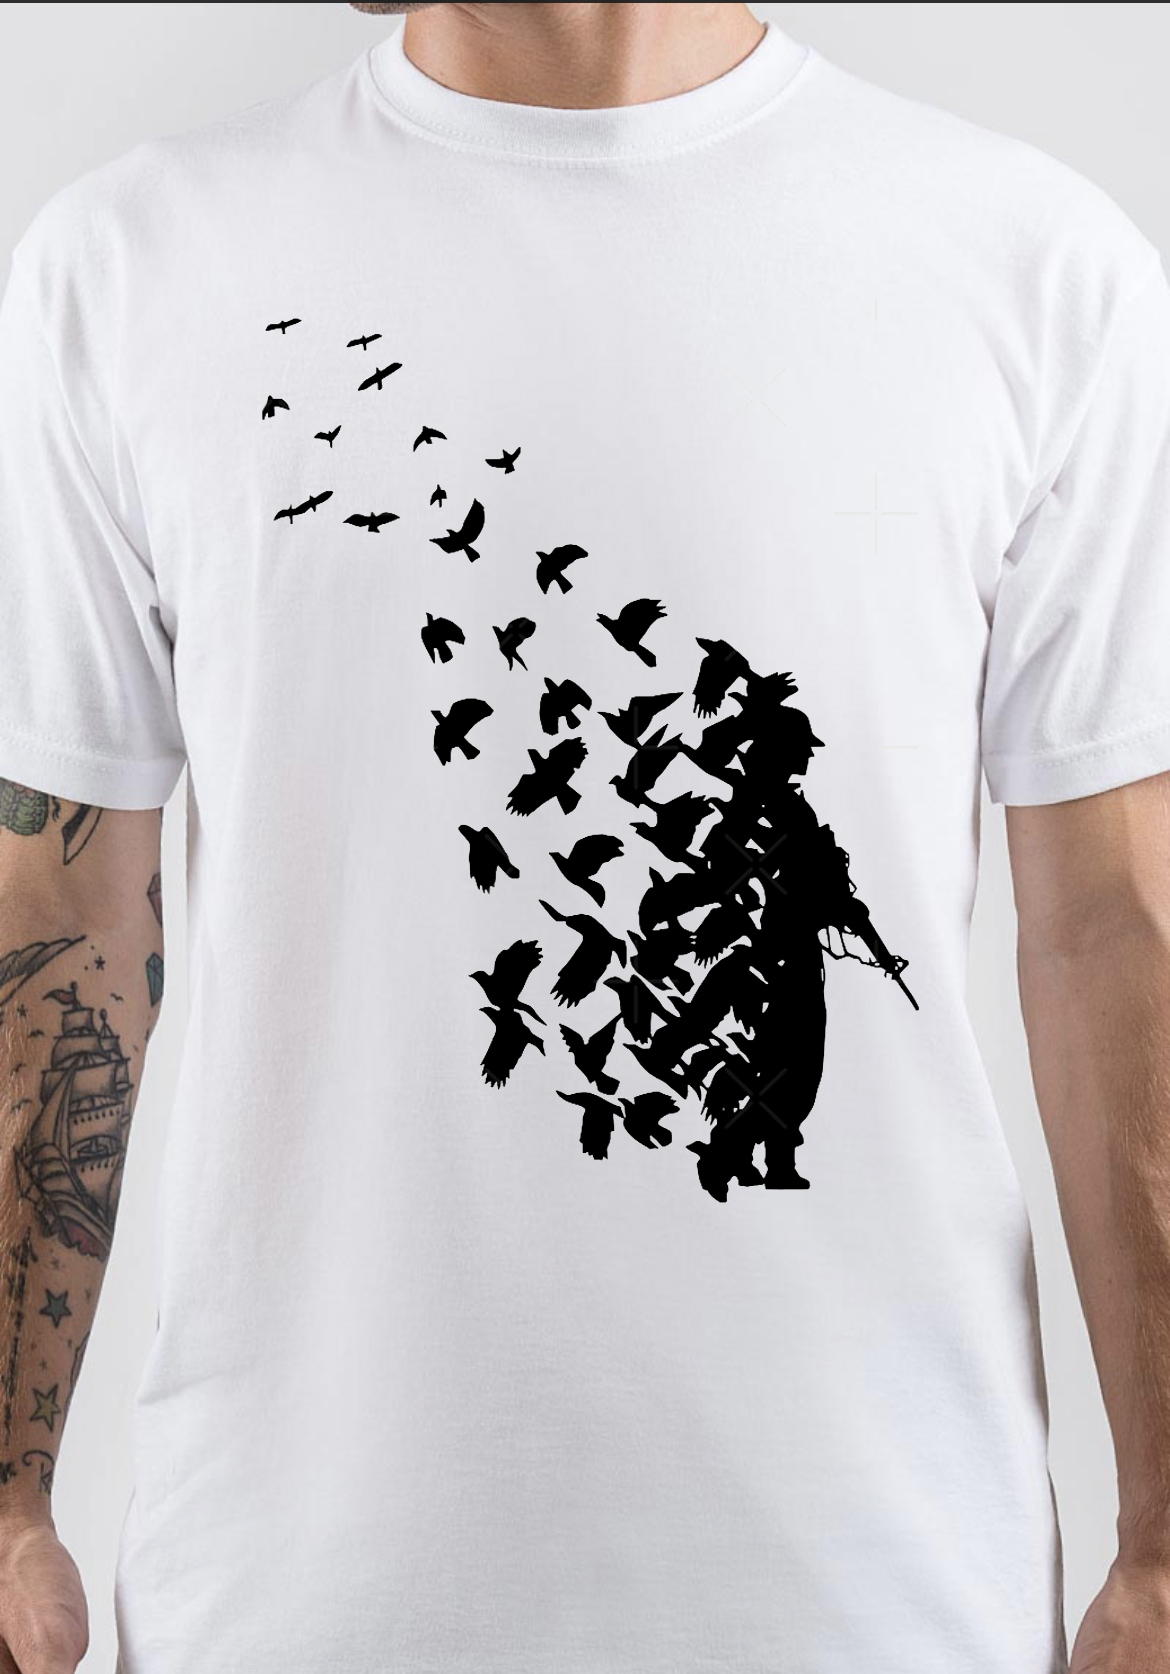 Banksy T-Shirt And Merchandise